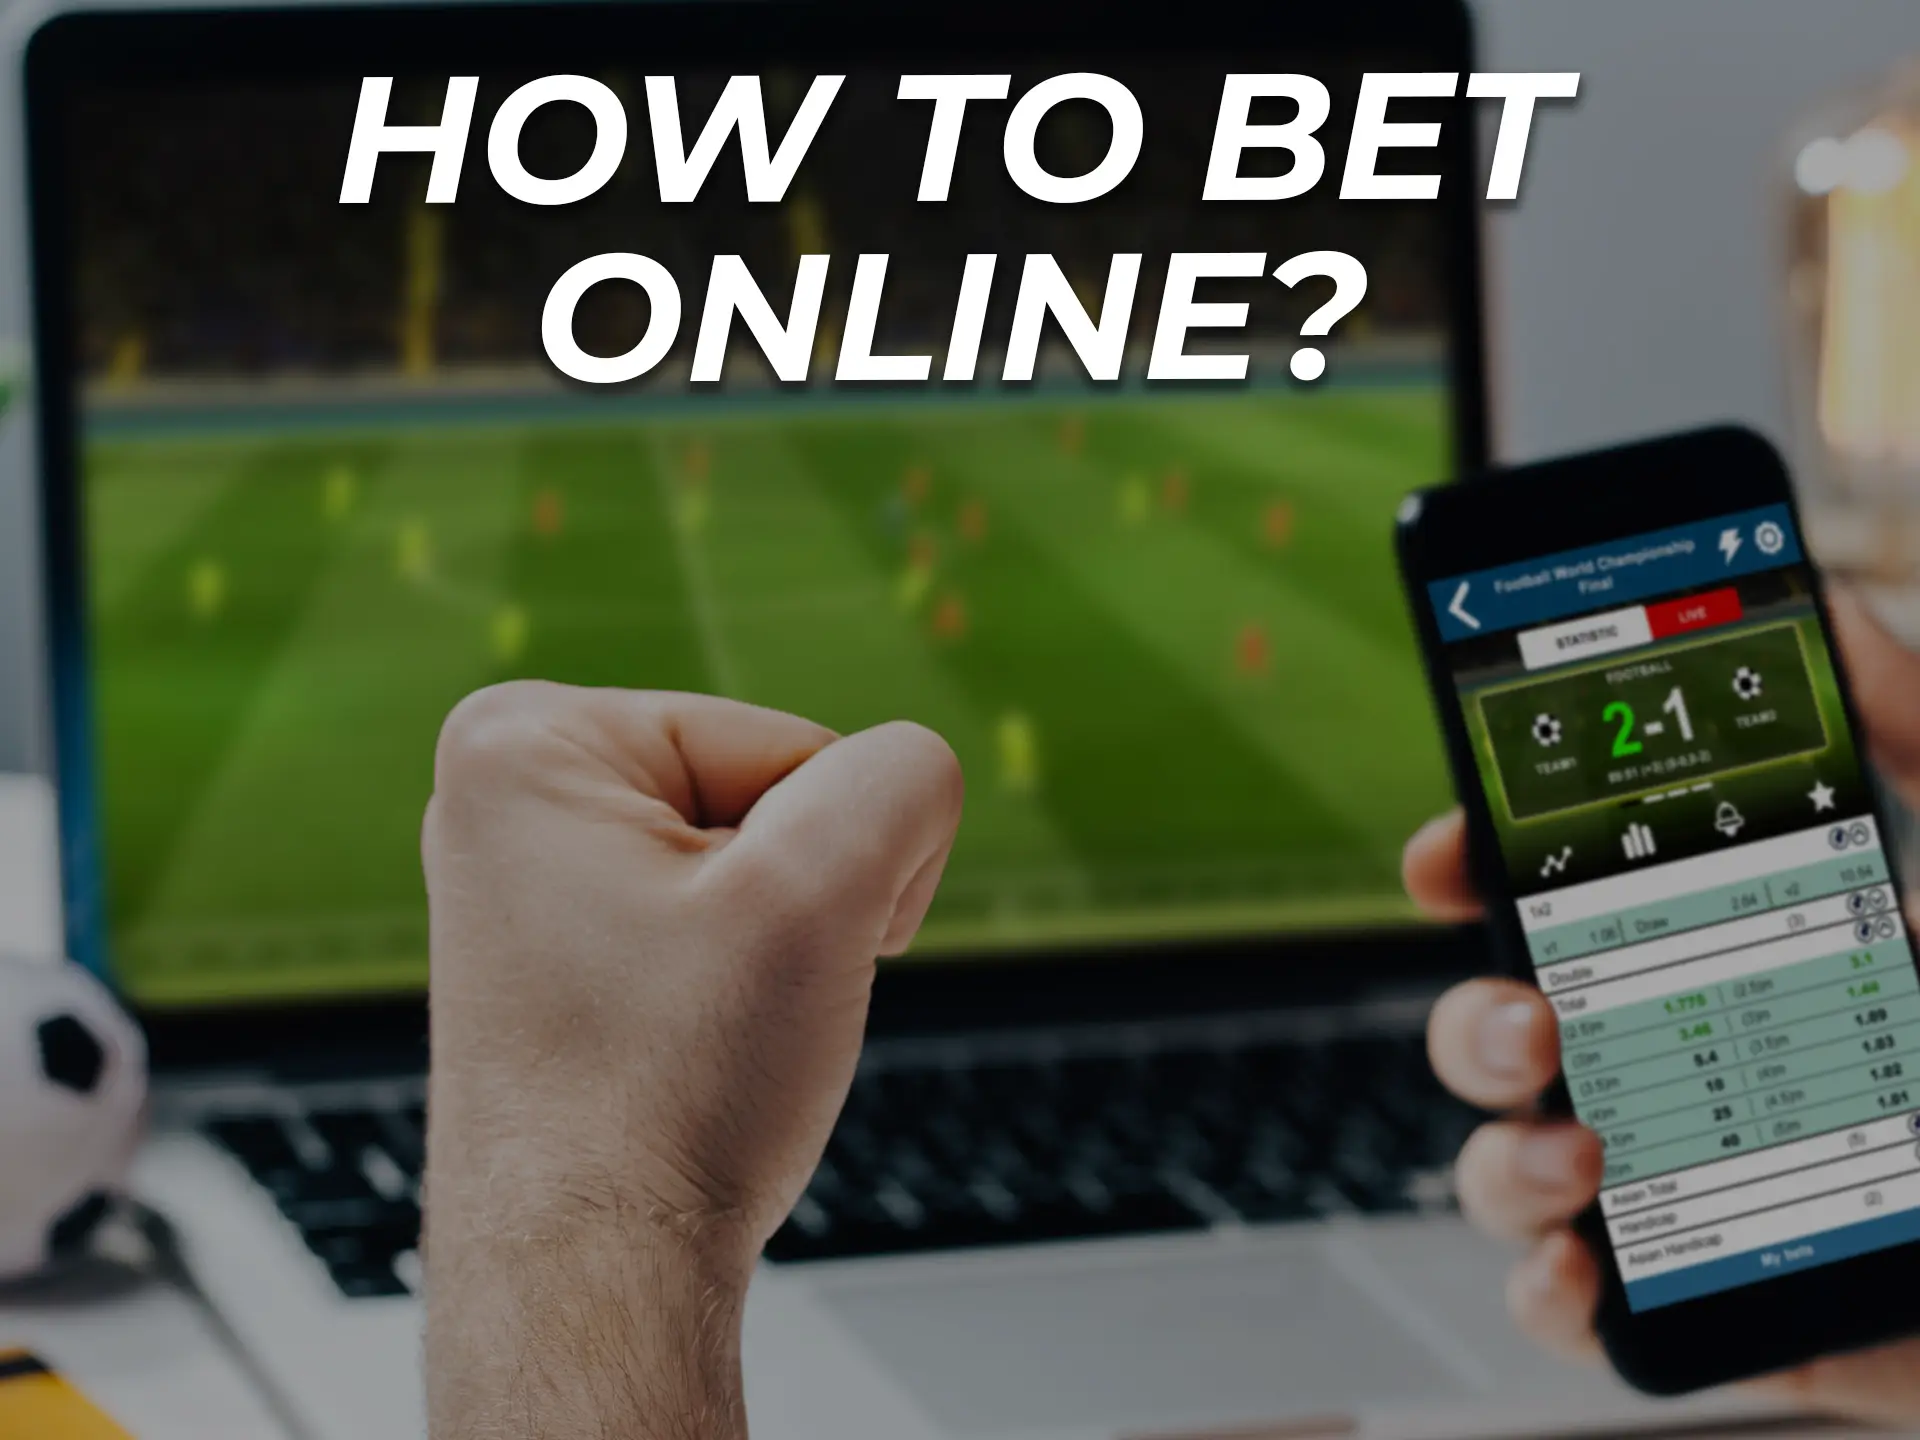 Use the detailed guides on our site to improve your online betting experience.